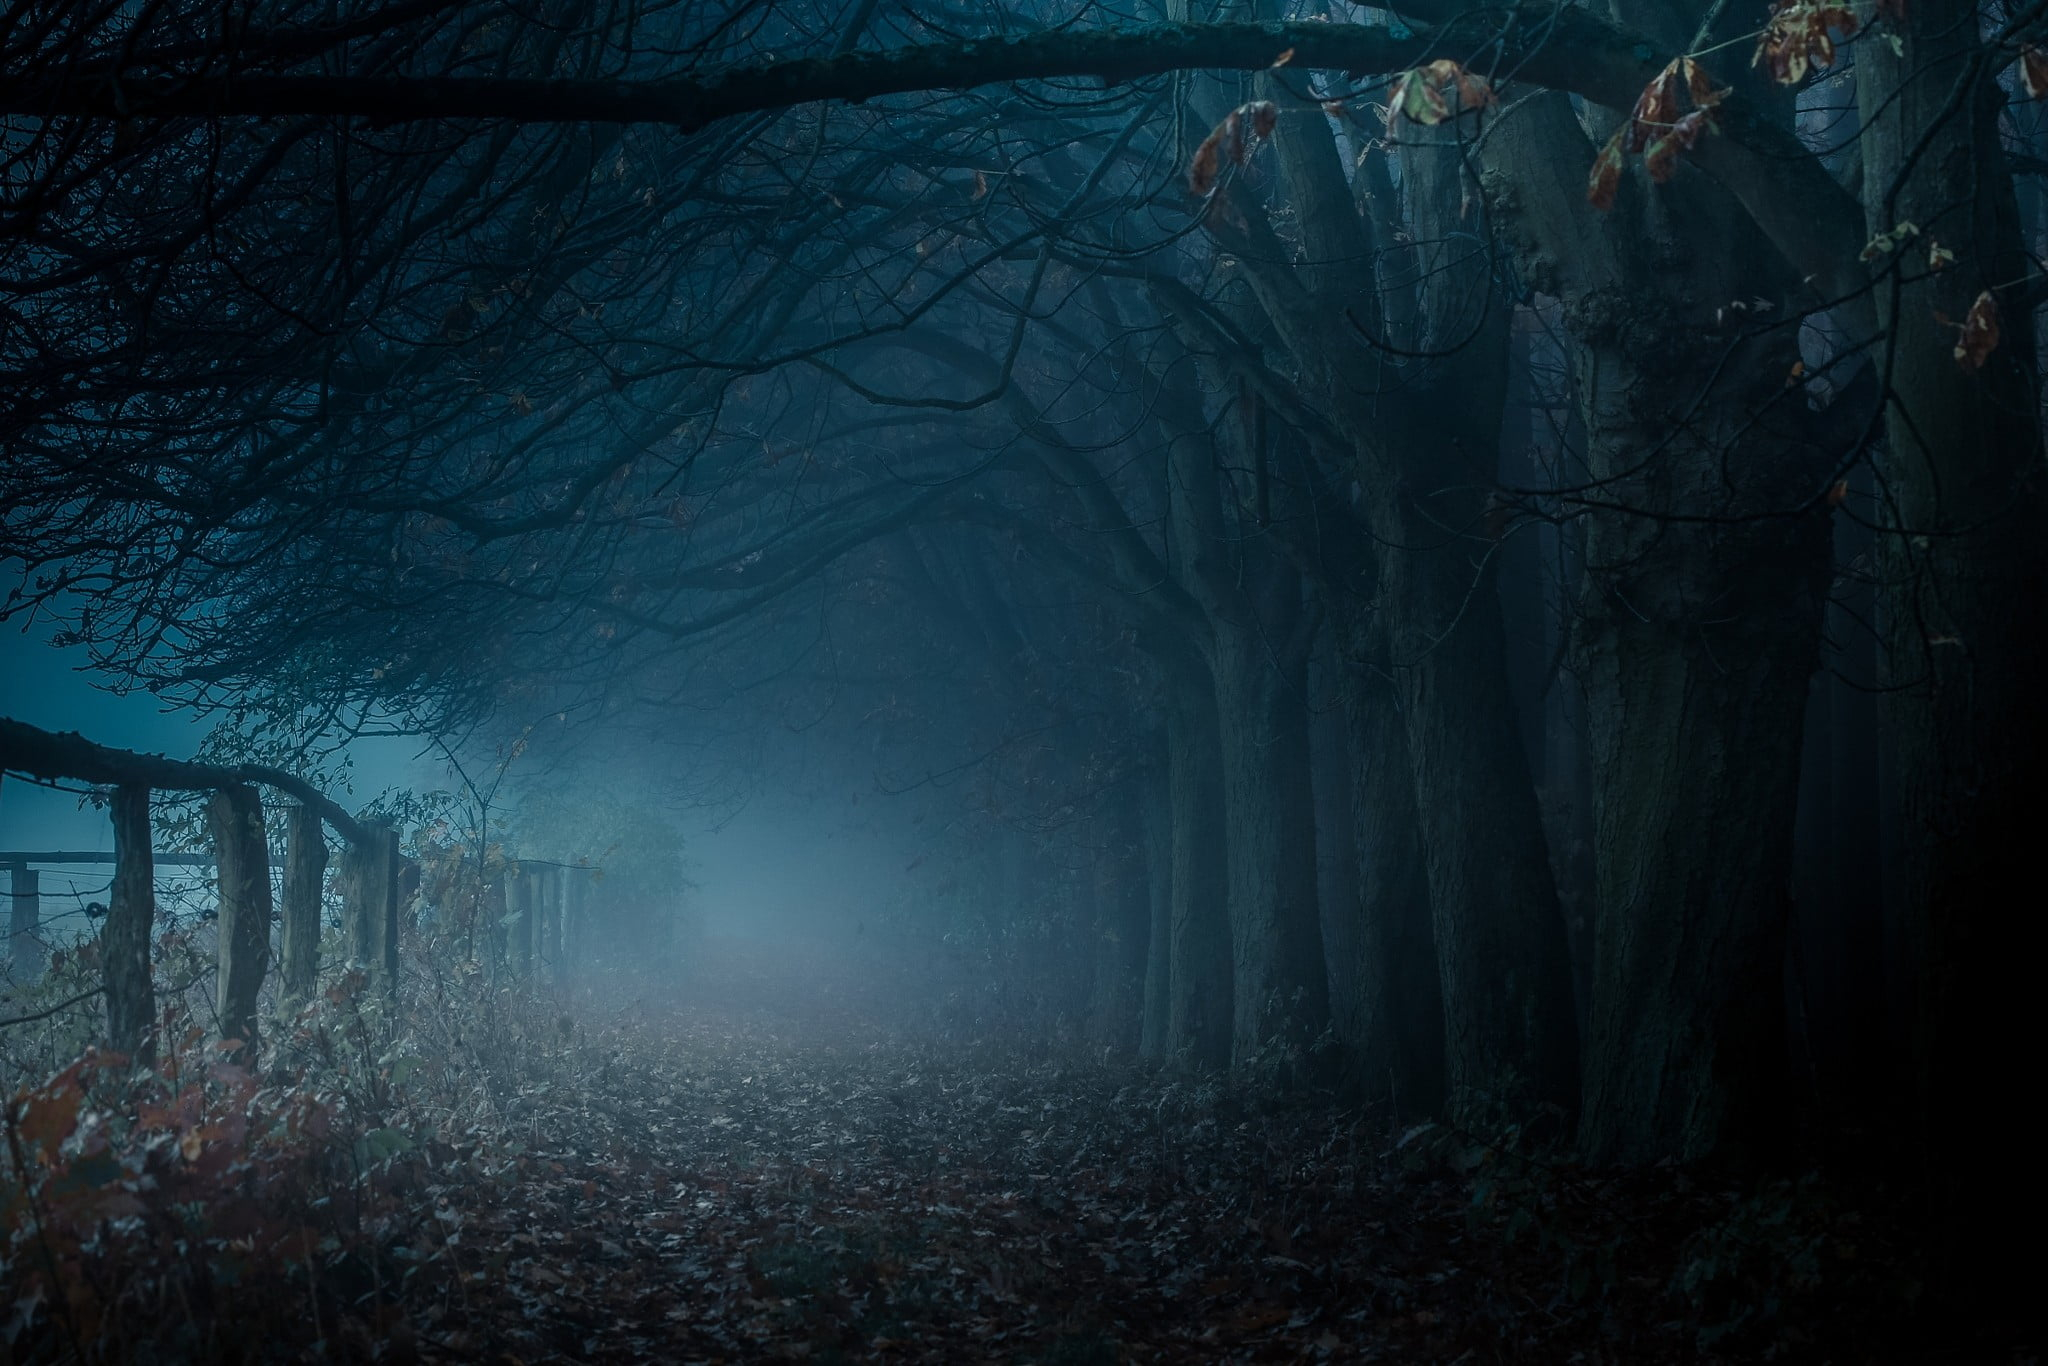 Brown bare trees, dark pathway with dead trees and fog, mist • Wallpaper For You HD Wallpaper For Desktop & Mobile